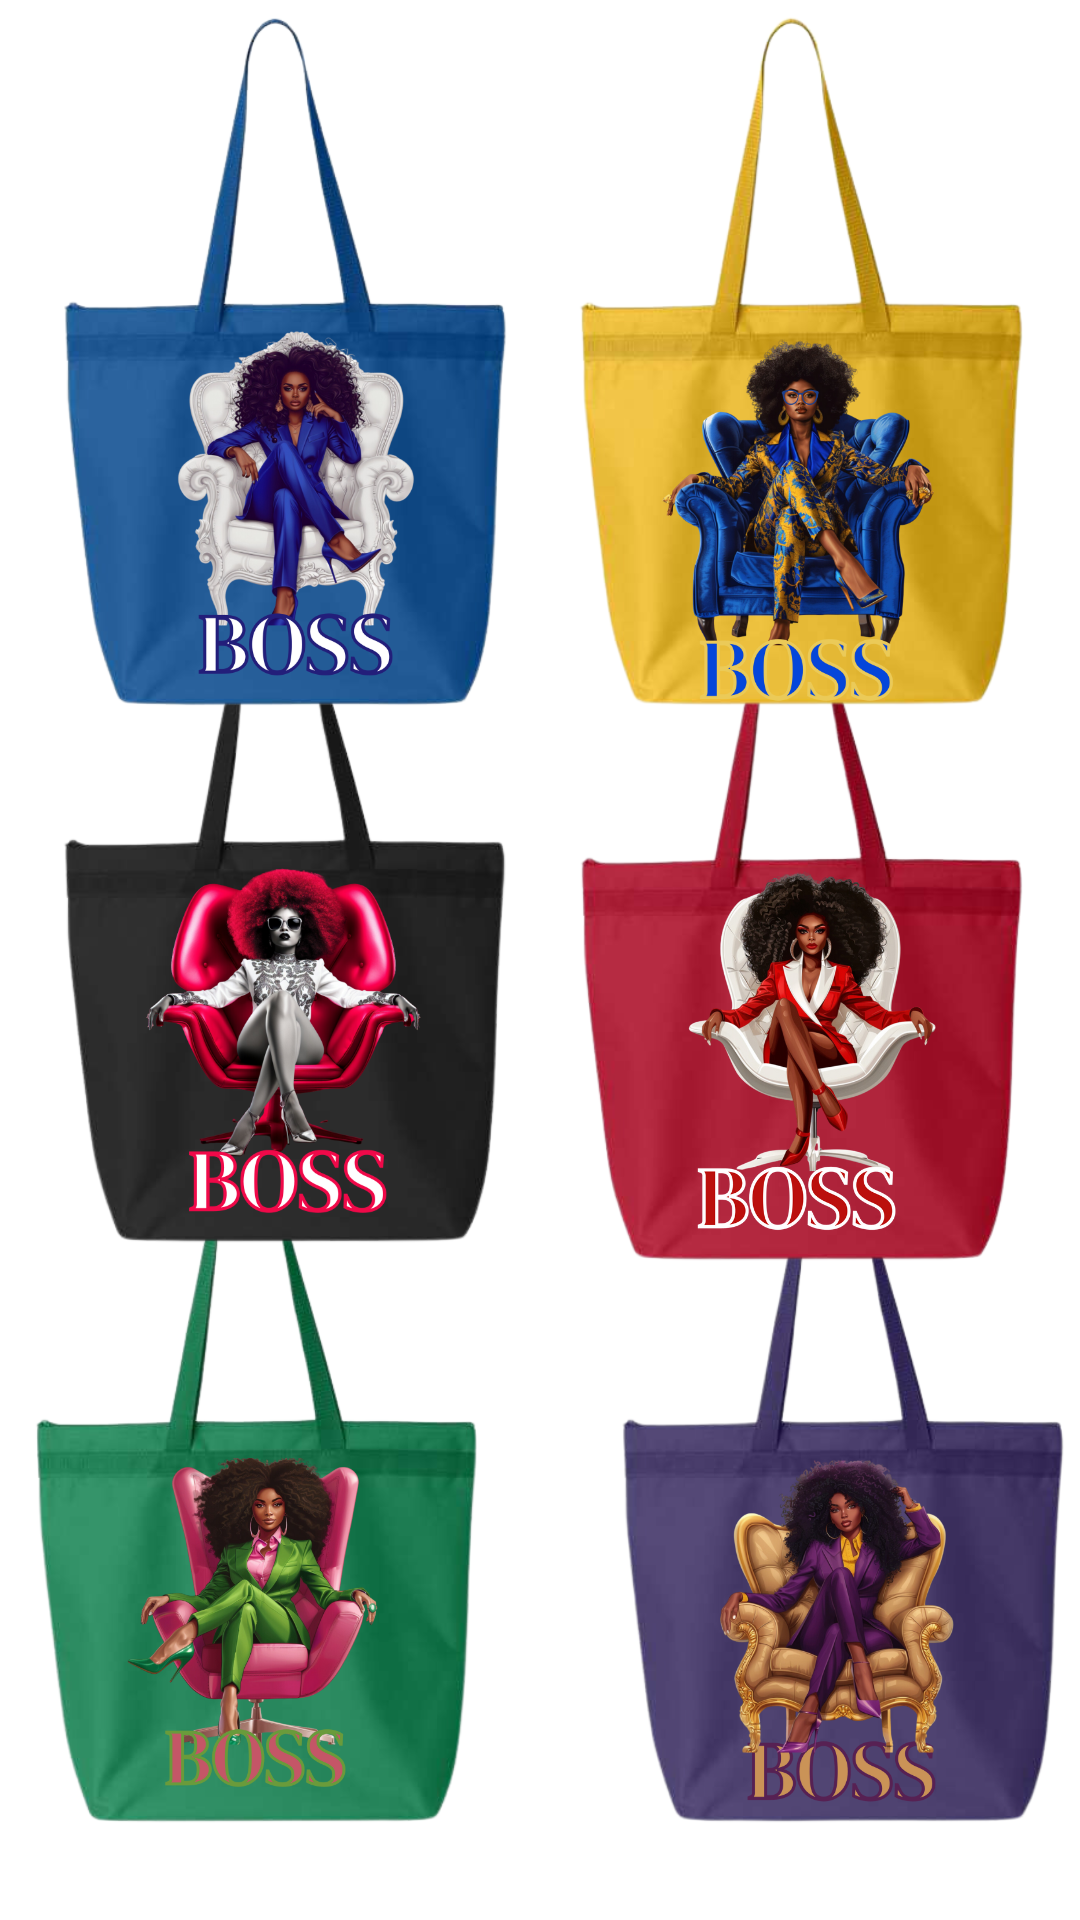 Because "I'm A Boss"  Tote Bag Black Women, Boss Babes, Minding My Own Small Business, Divine 9, Black Girl Magic